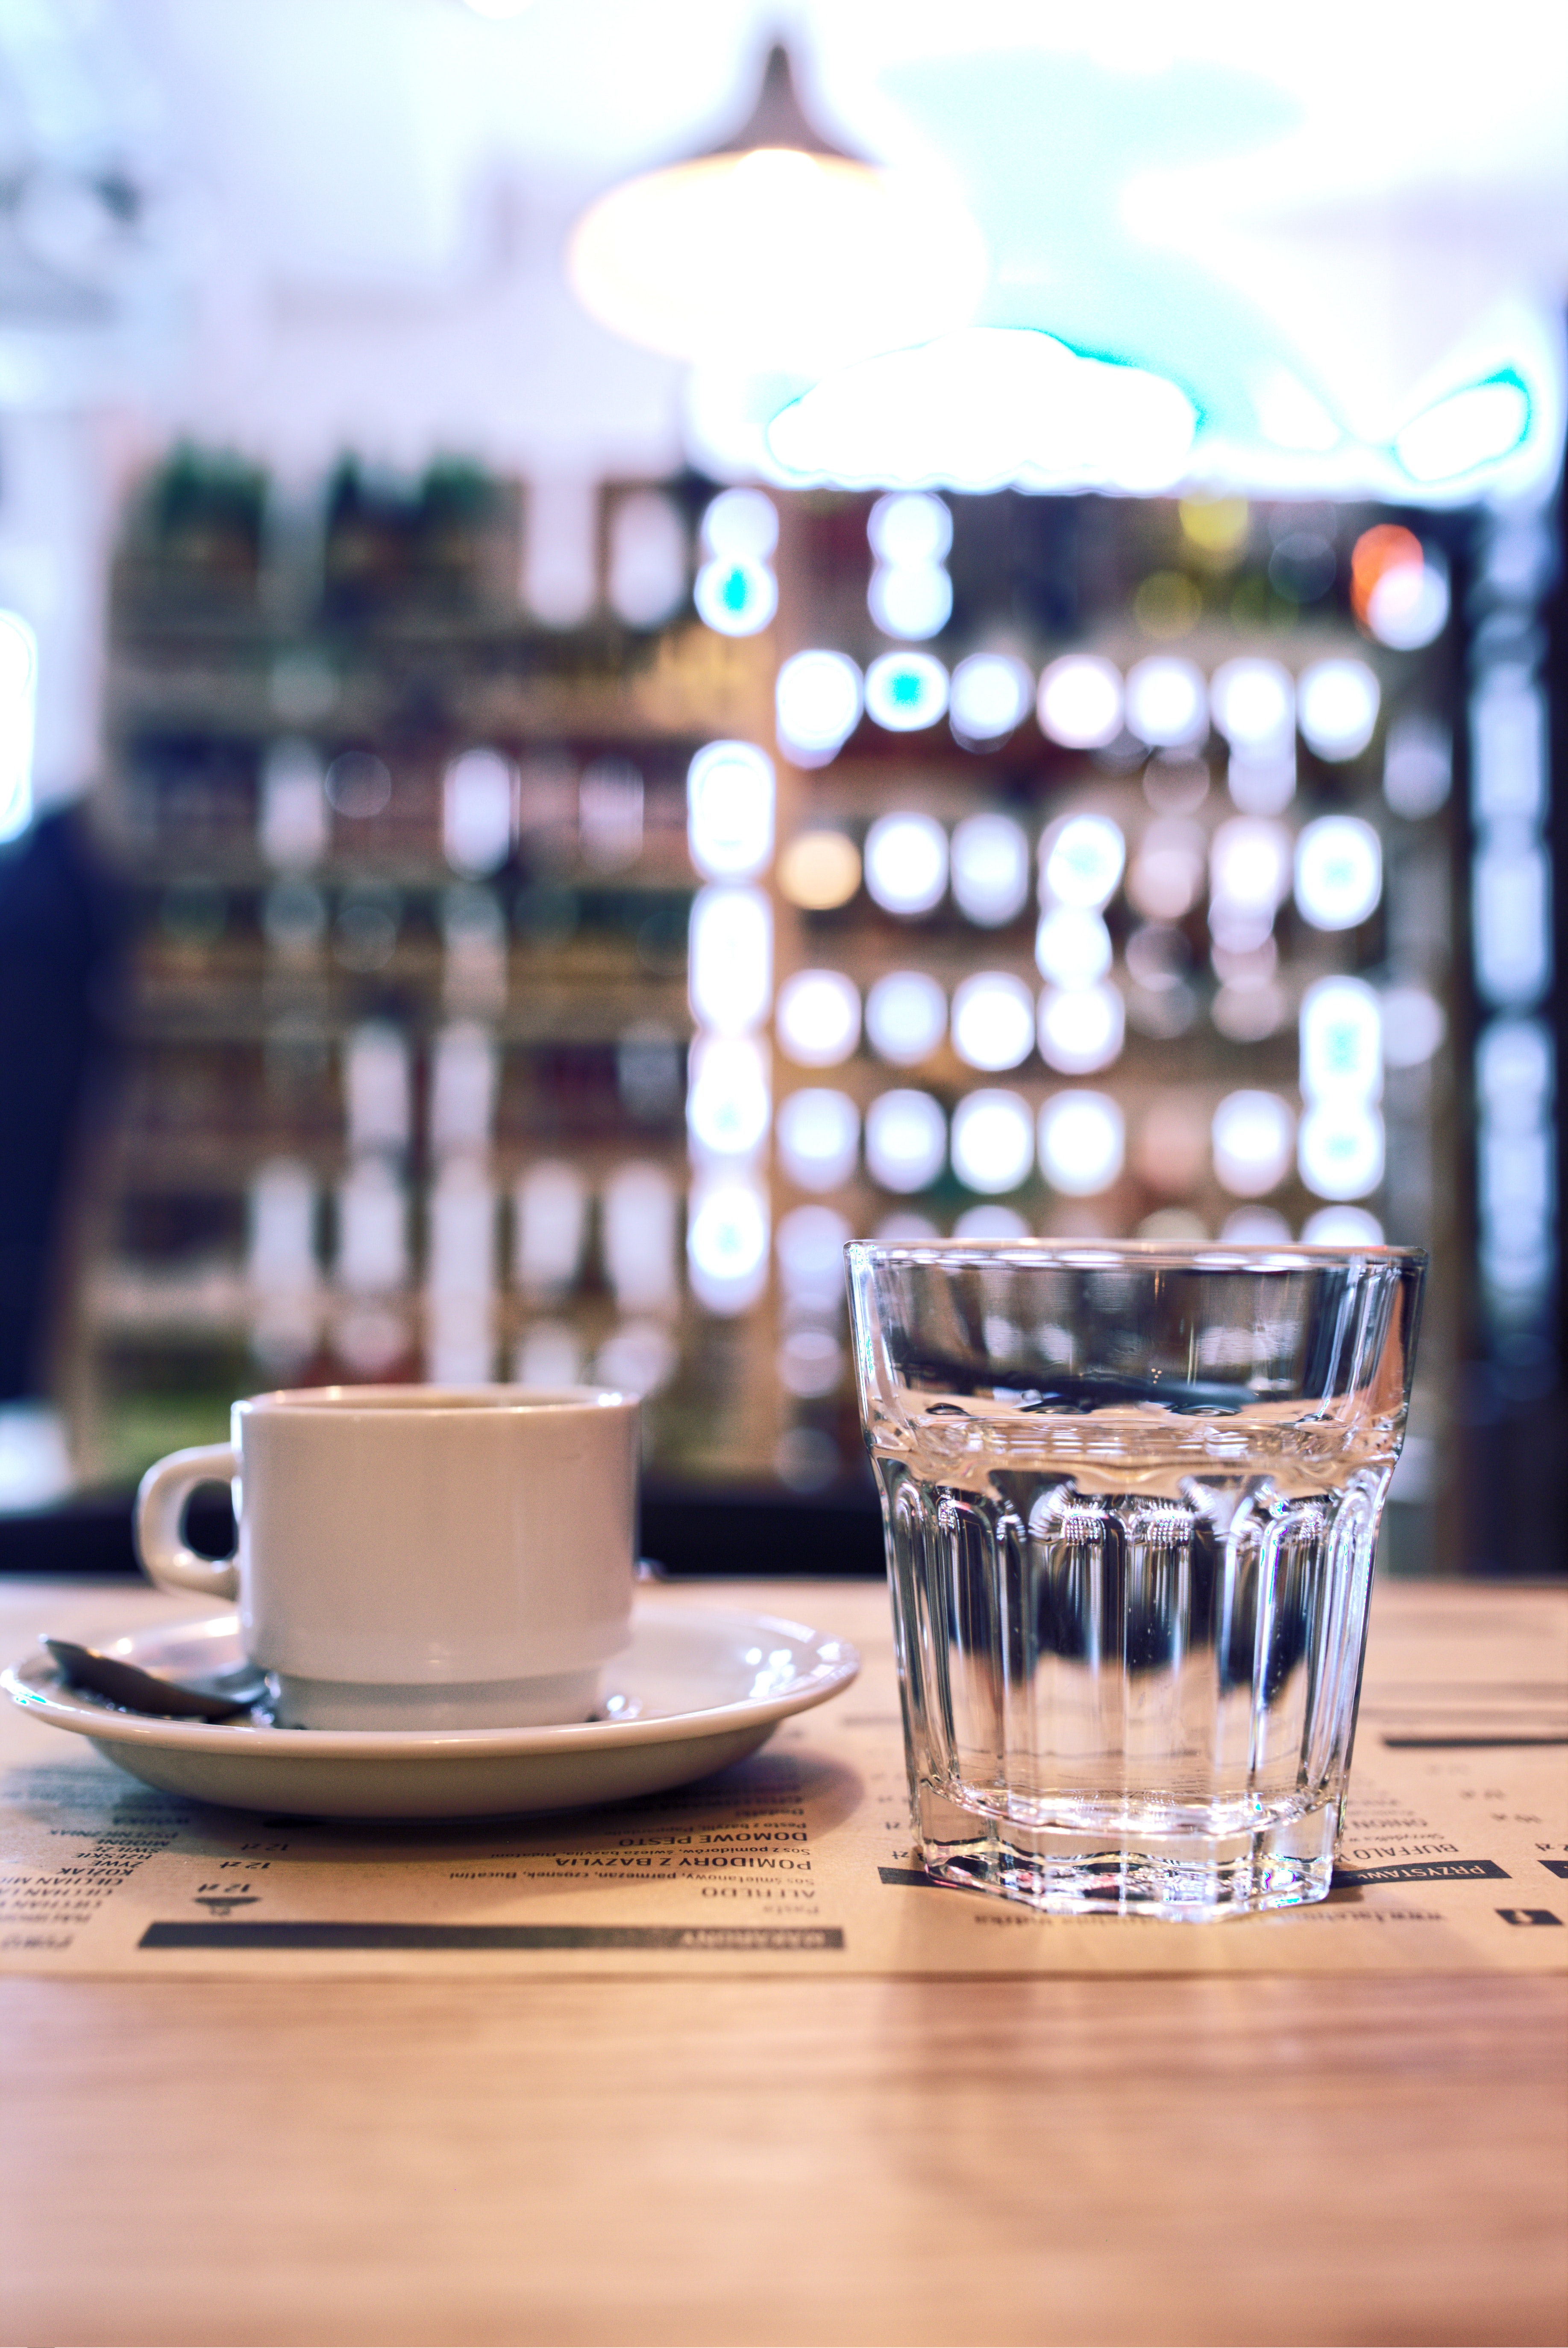 Cup of coffee and glass of water, Cafe, Coffee, Cup, Espresso, HQ Photo